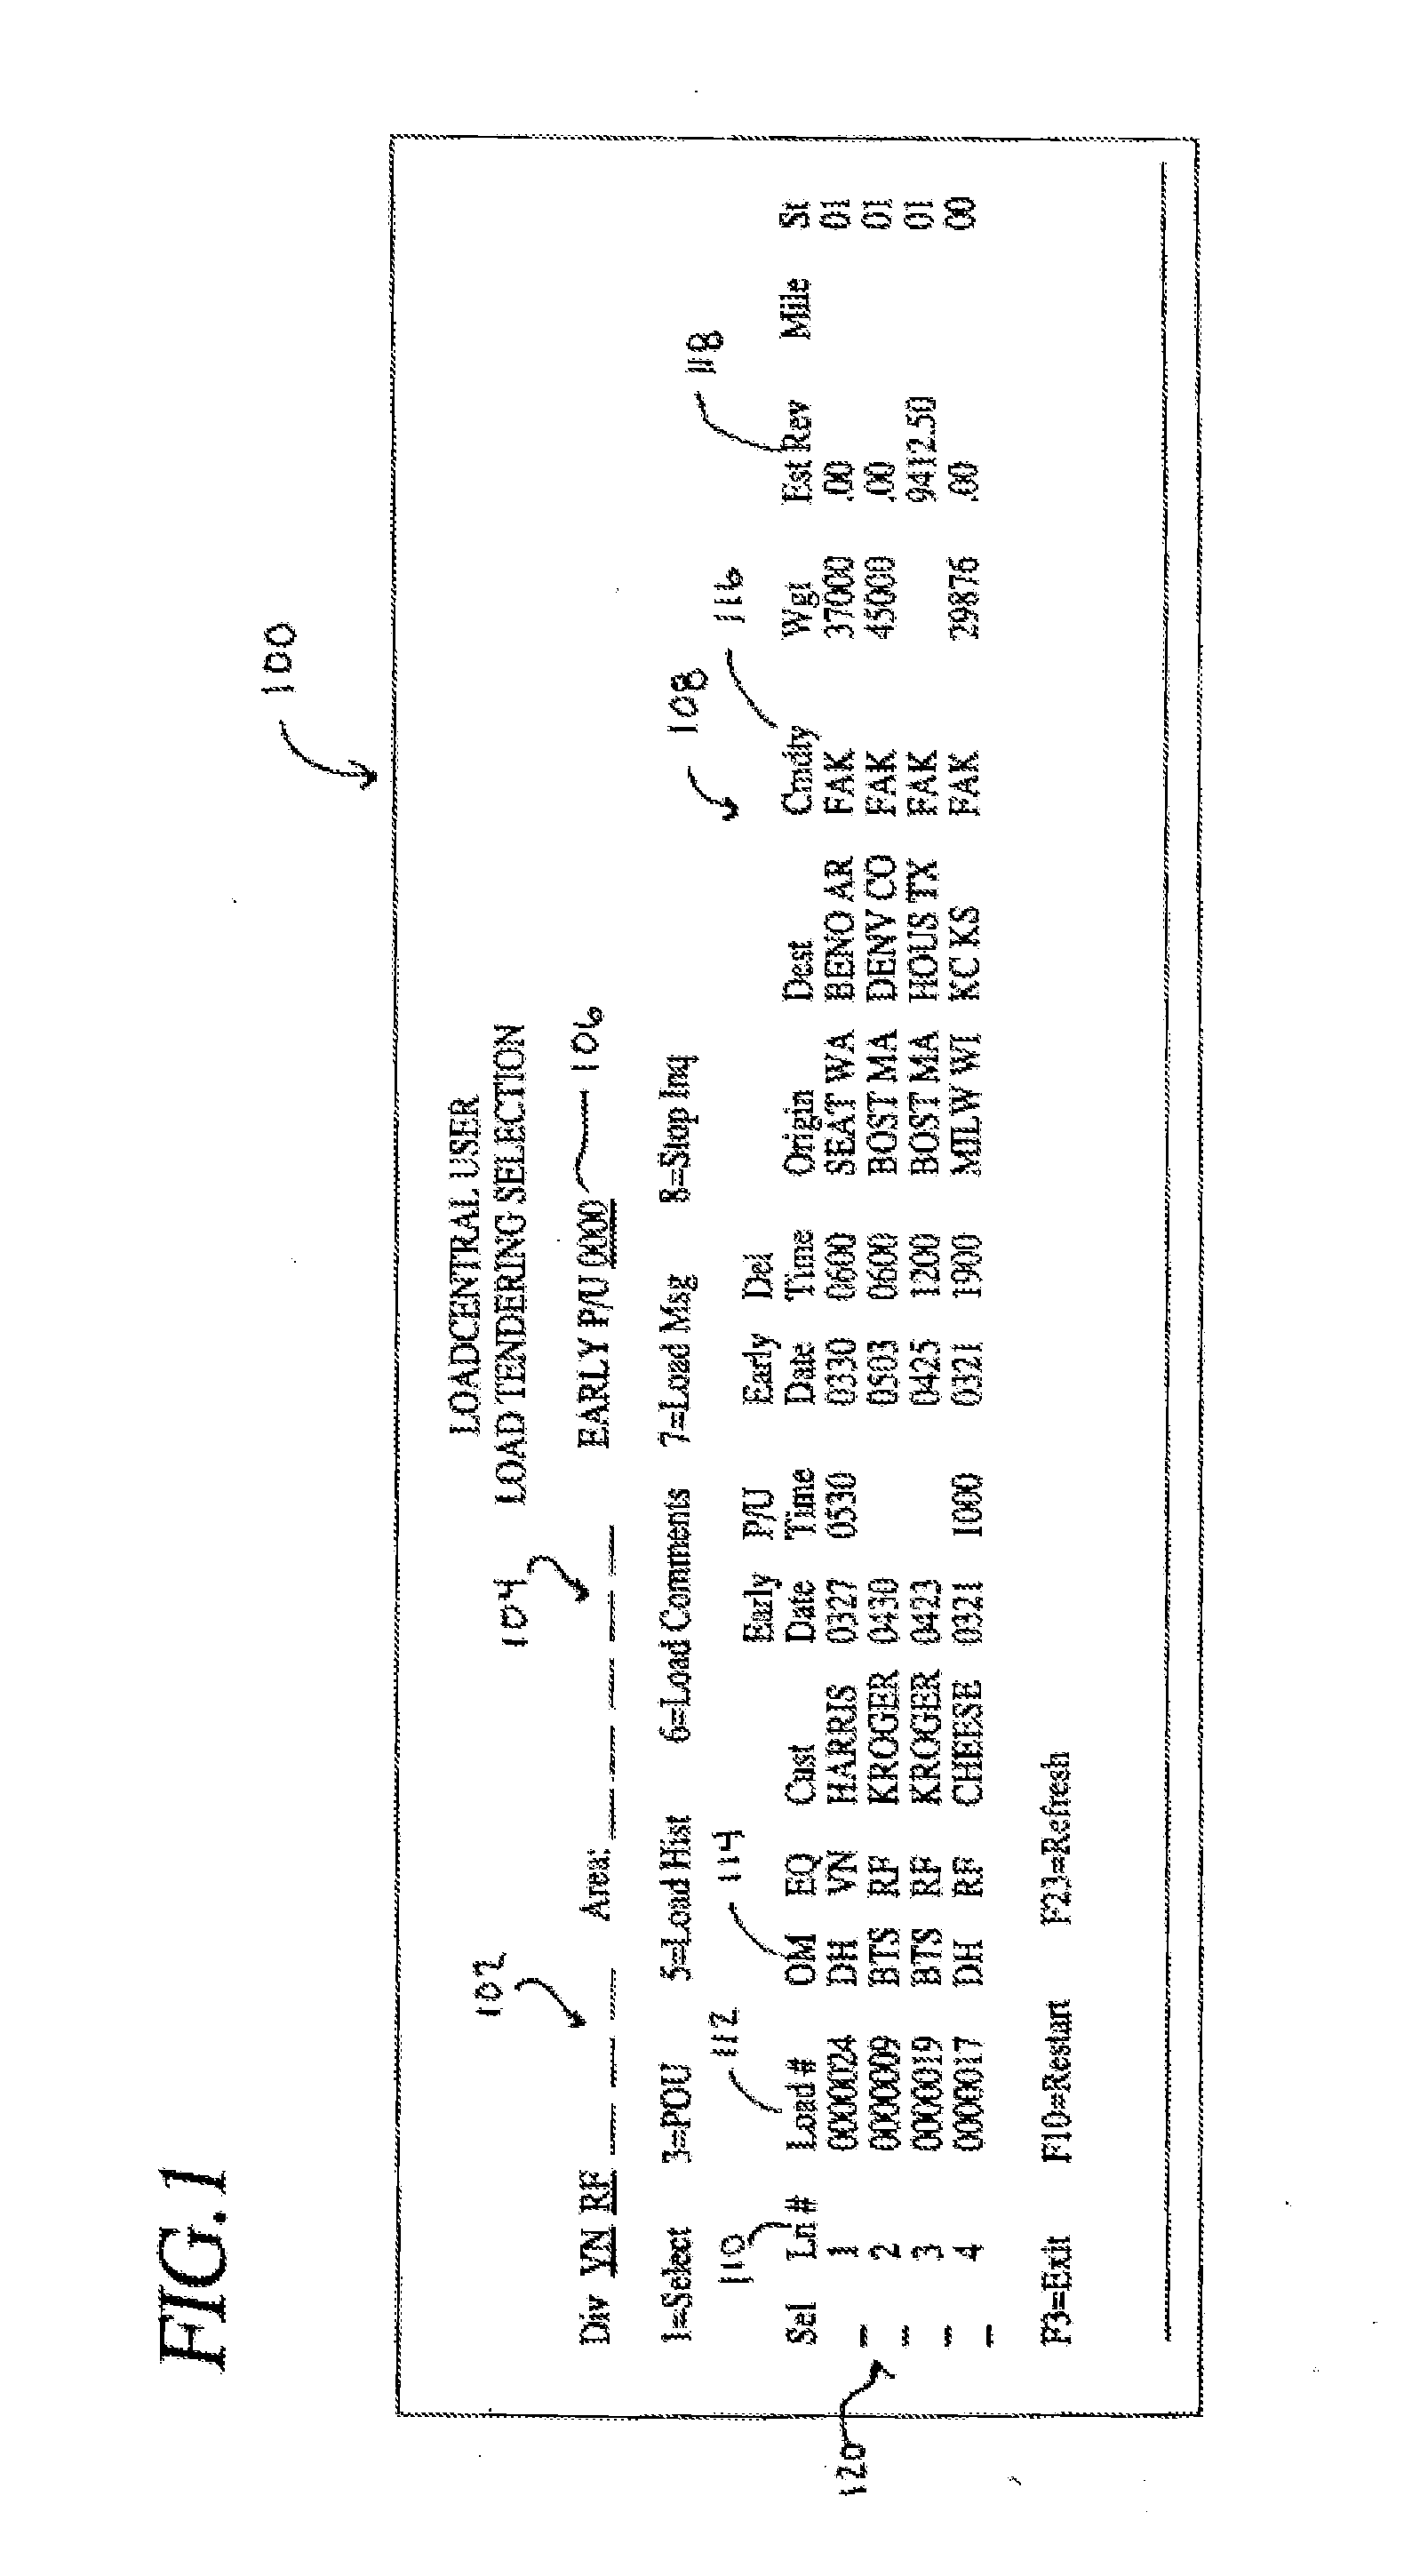 Method and system for matching and monitoring freight loads